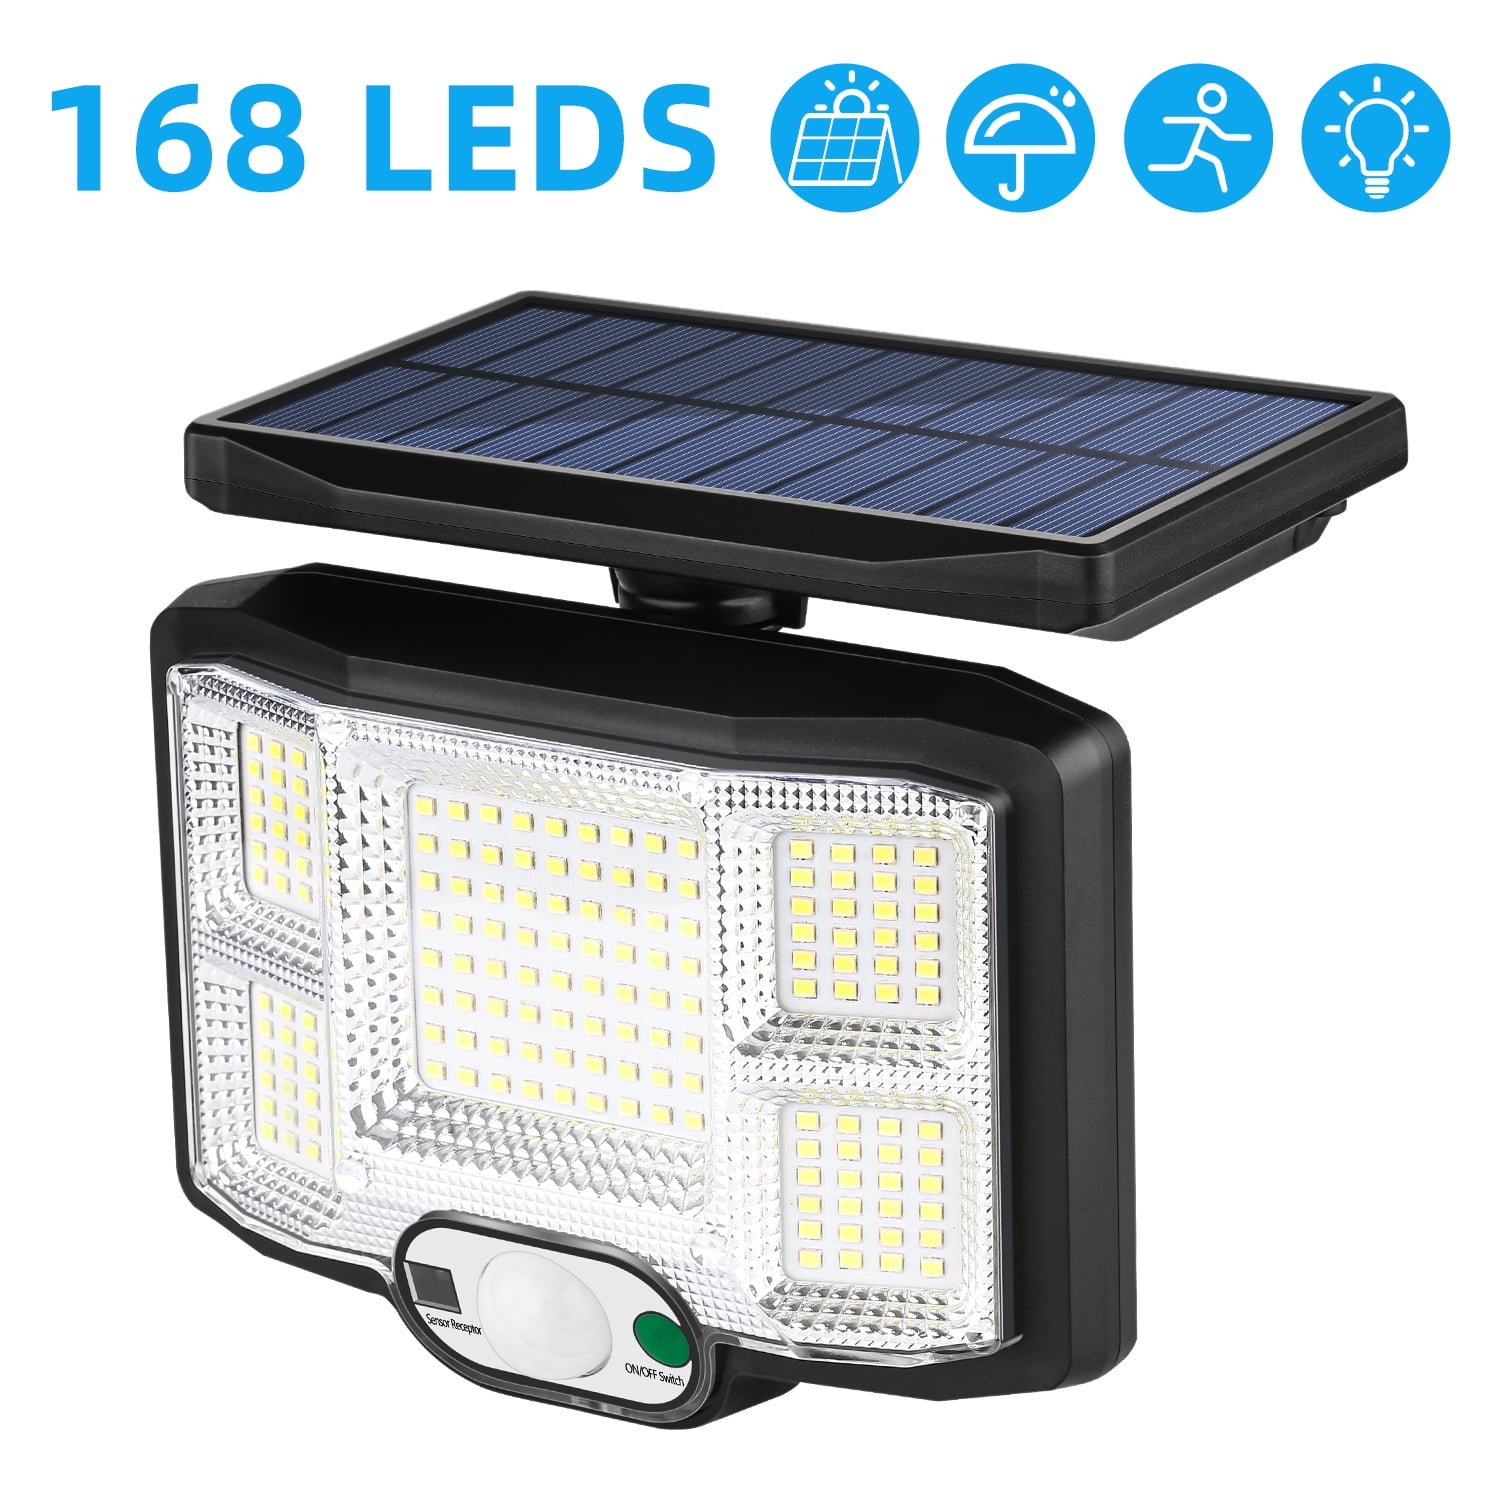 Solar Floodlight Outdoor 120 LED IP65 Waterproof with Remote Auto On Off Dusk to Dawn for Pathway Patio Garden Shed Yard and Driveway by GEN Solar 